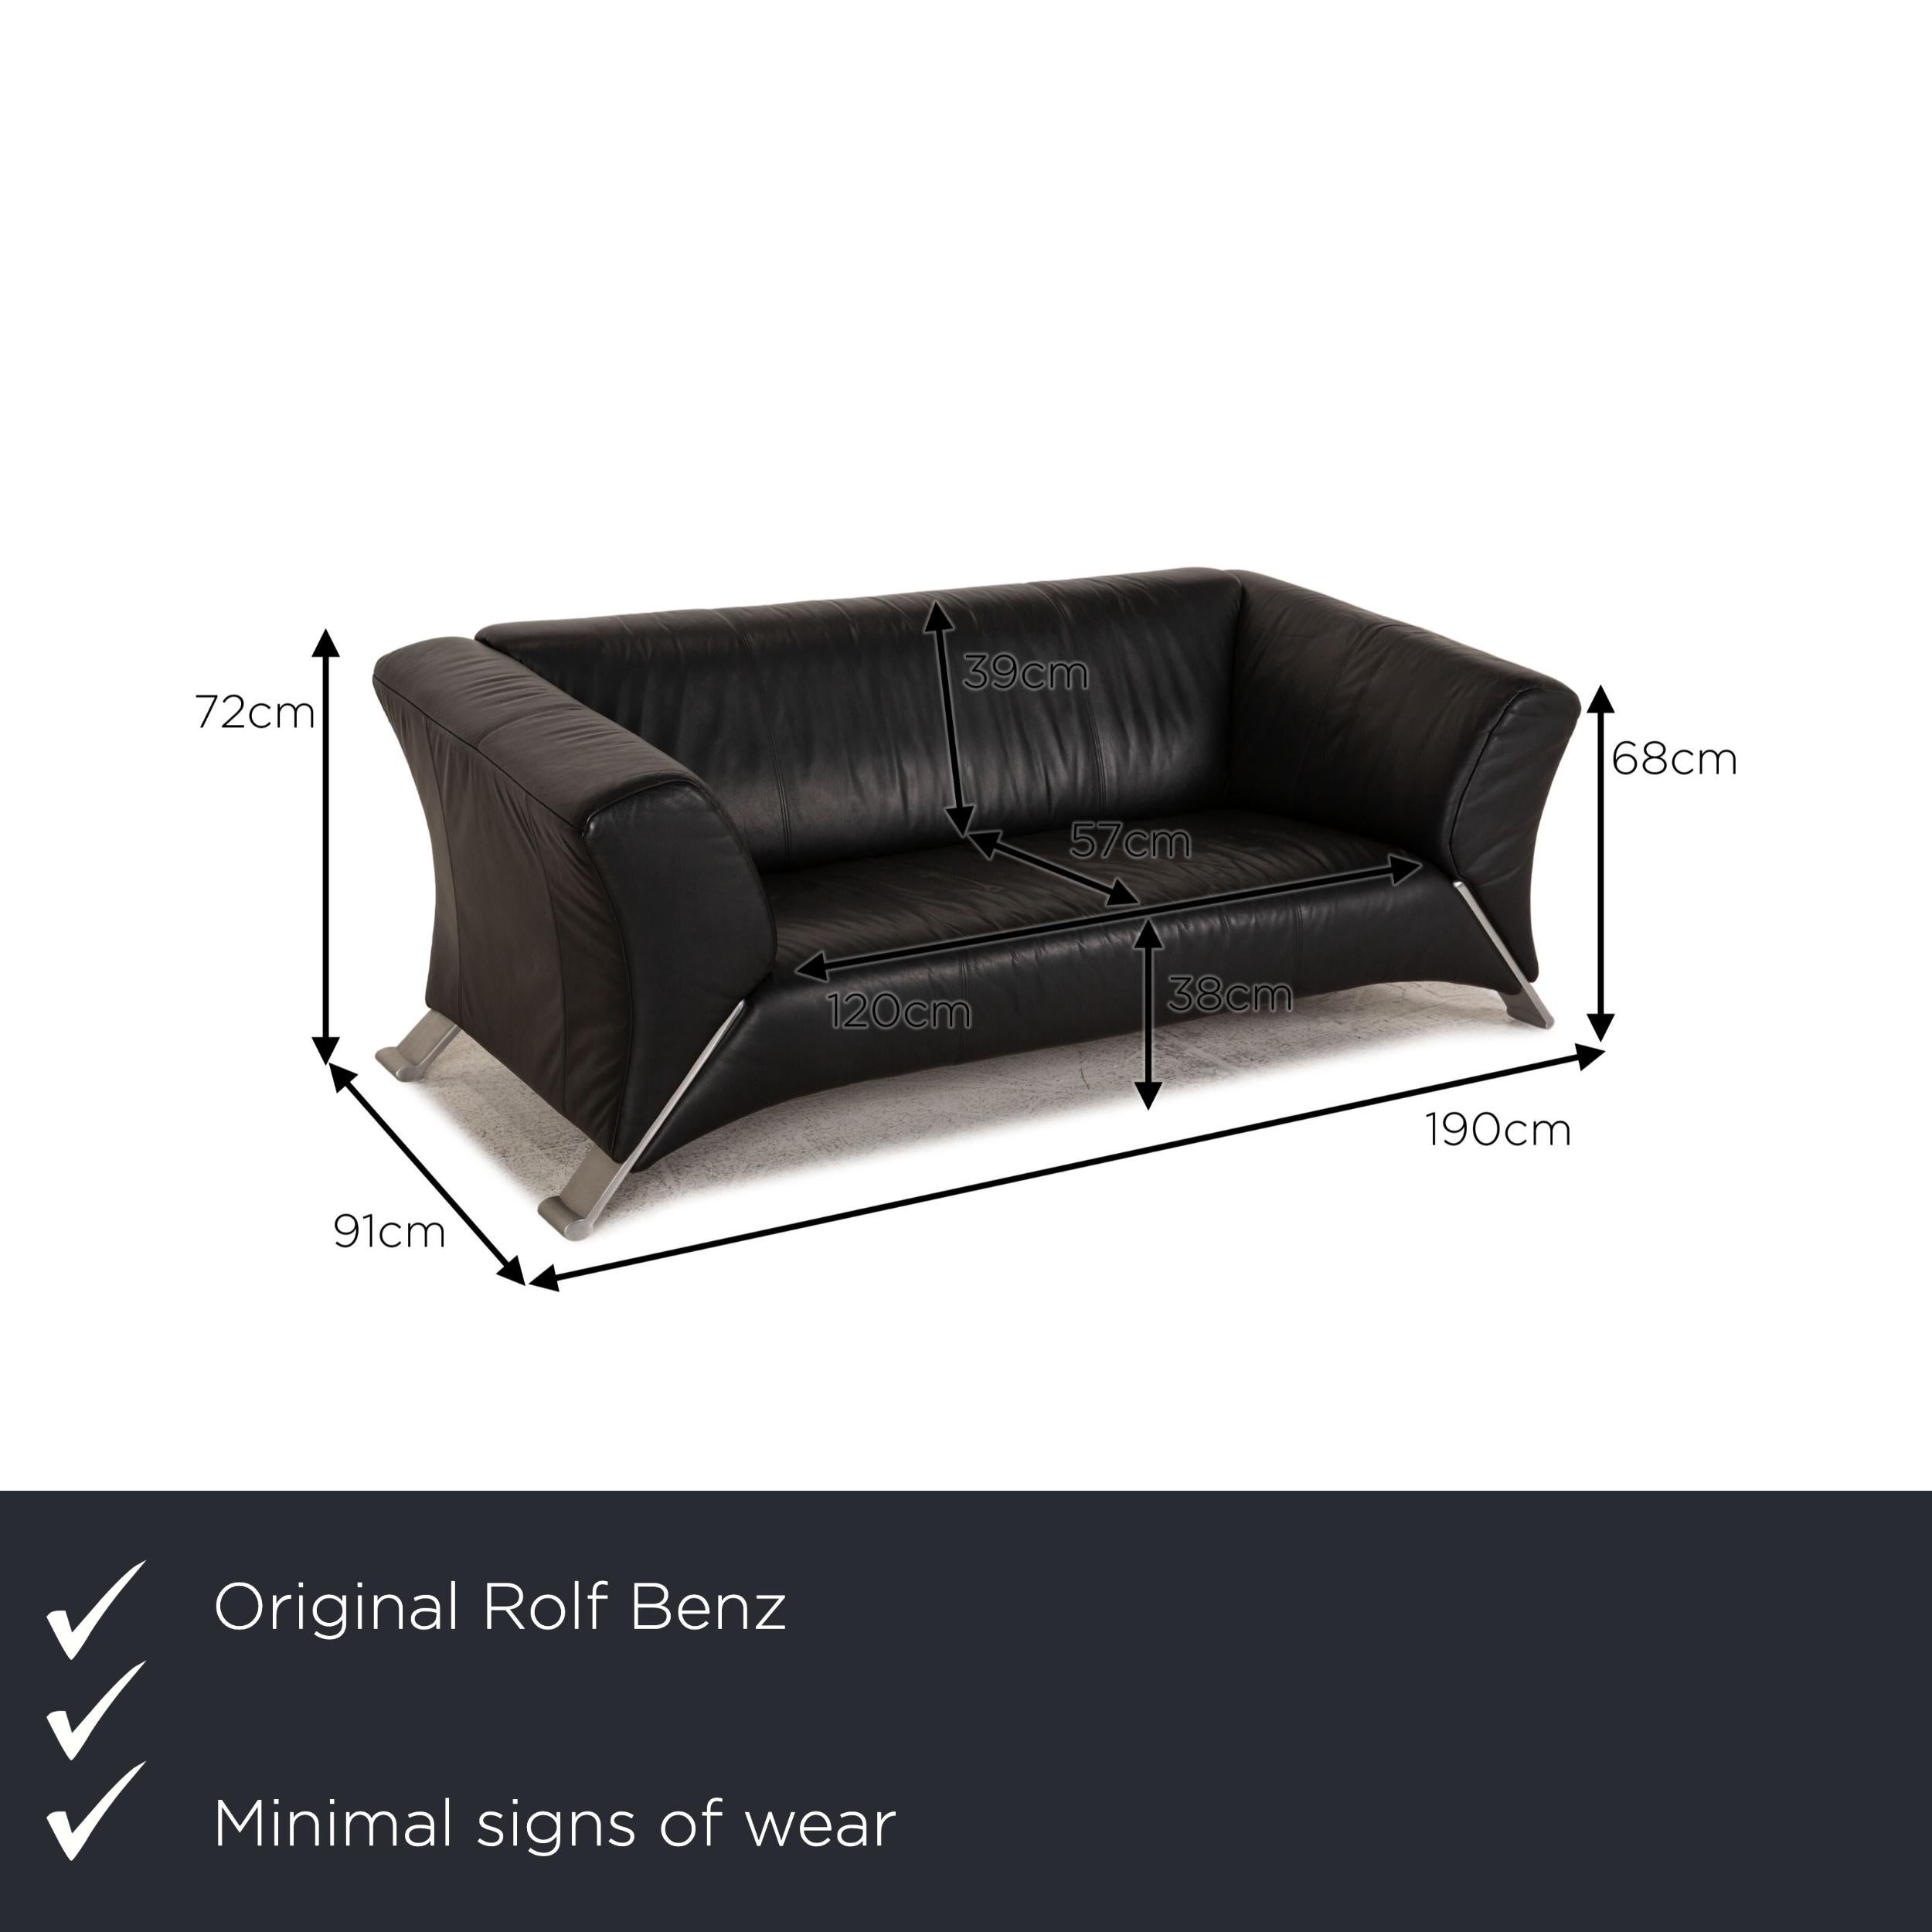 We present to you a Rolf Benz 322 leather sofa black three-seater couch.

Product measurements in centimeters:

depth: 91
width: 190
height: 72
seat height: 38
rest height: 68
seat depth: 57
seat width: 120
back height: 39.

 